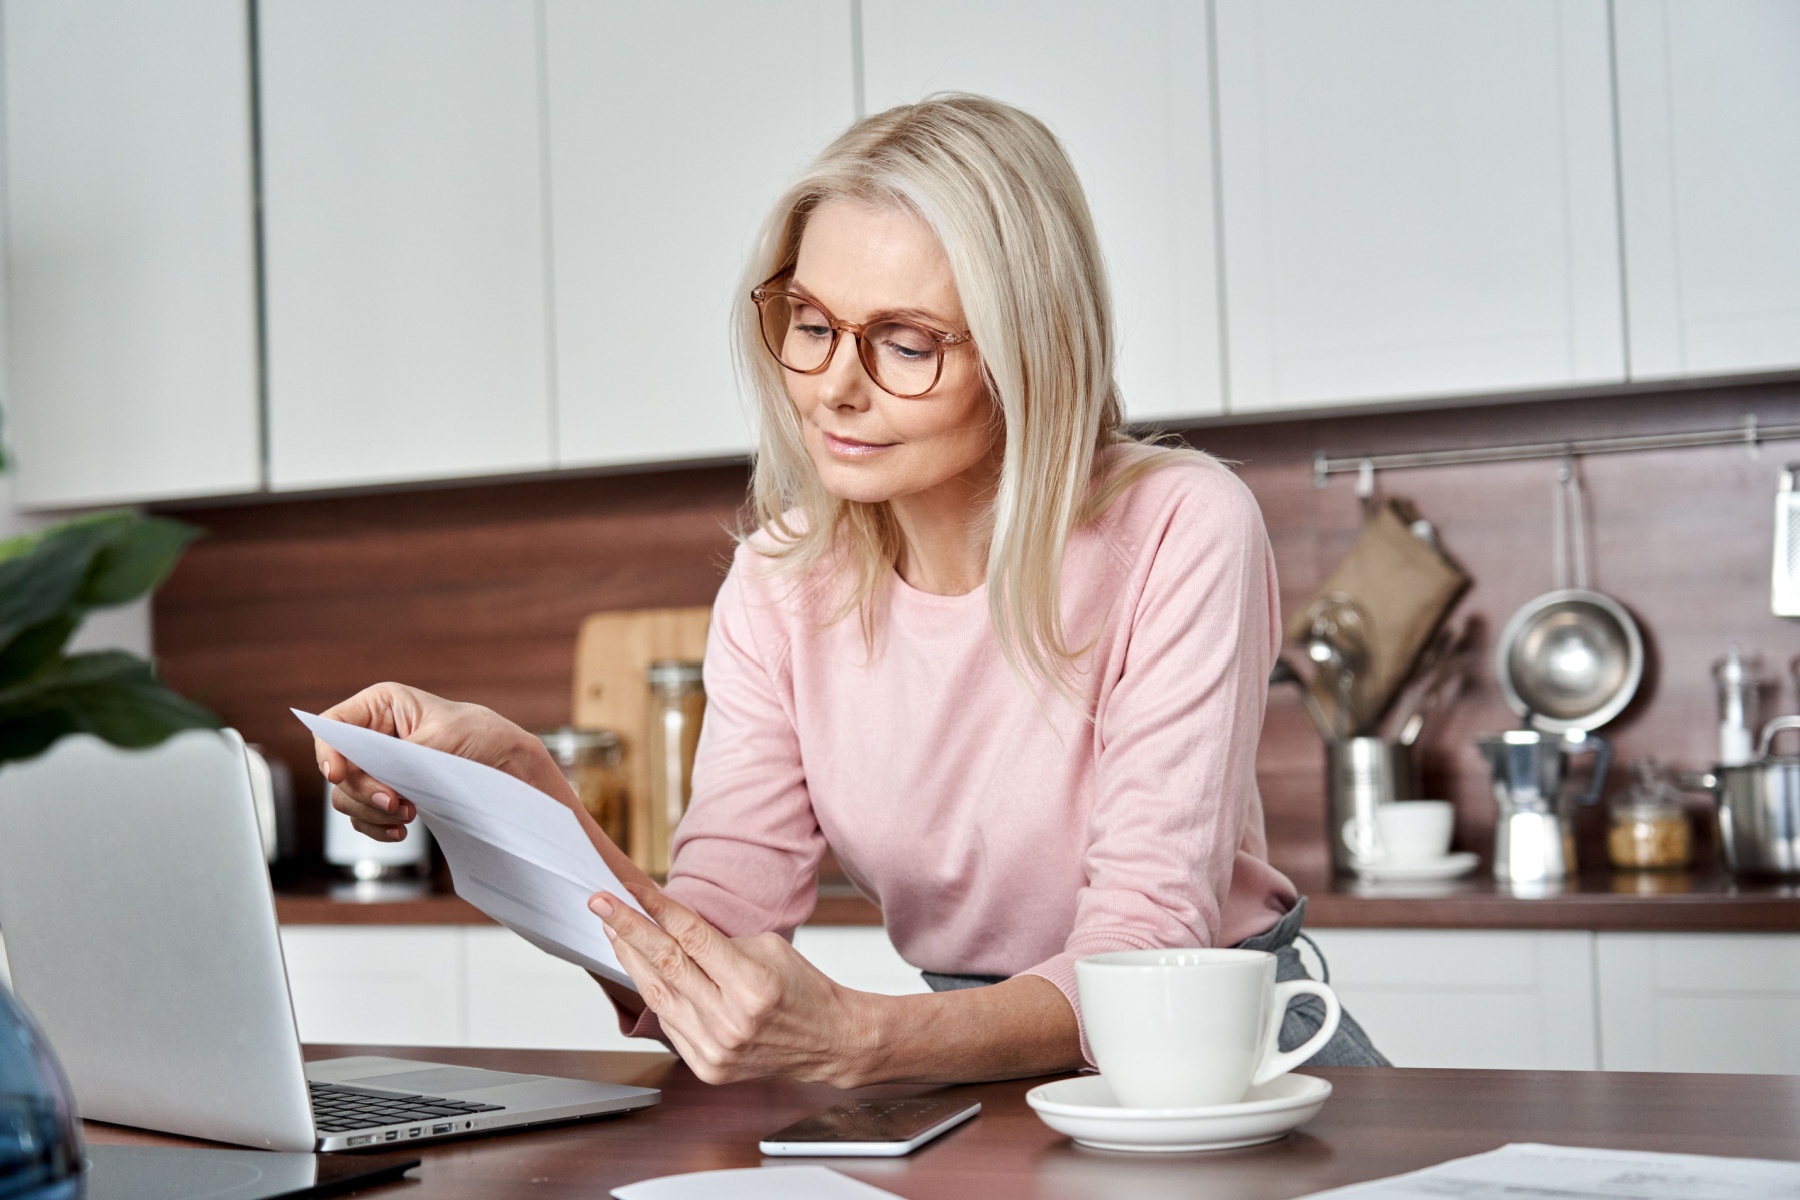 Middle-aged woman looks at documents in front of laptop